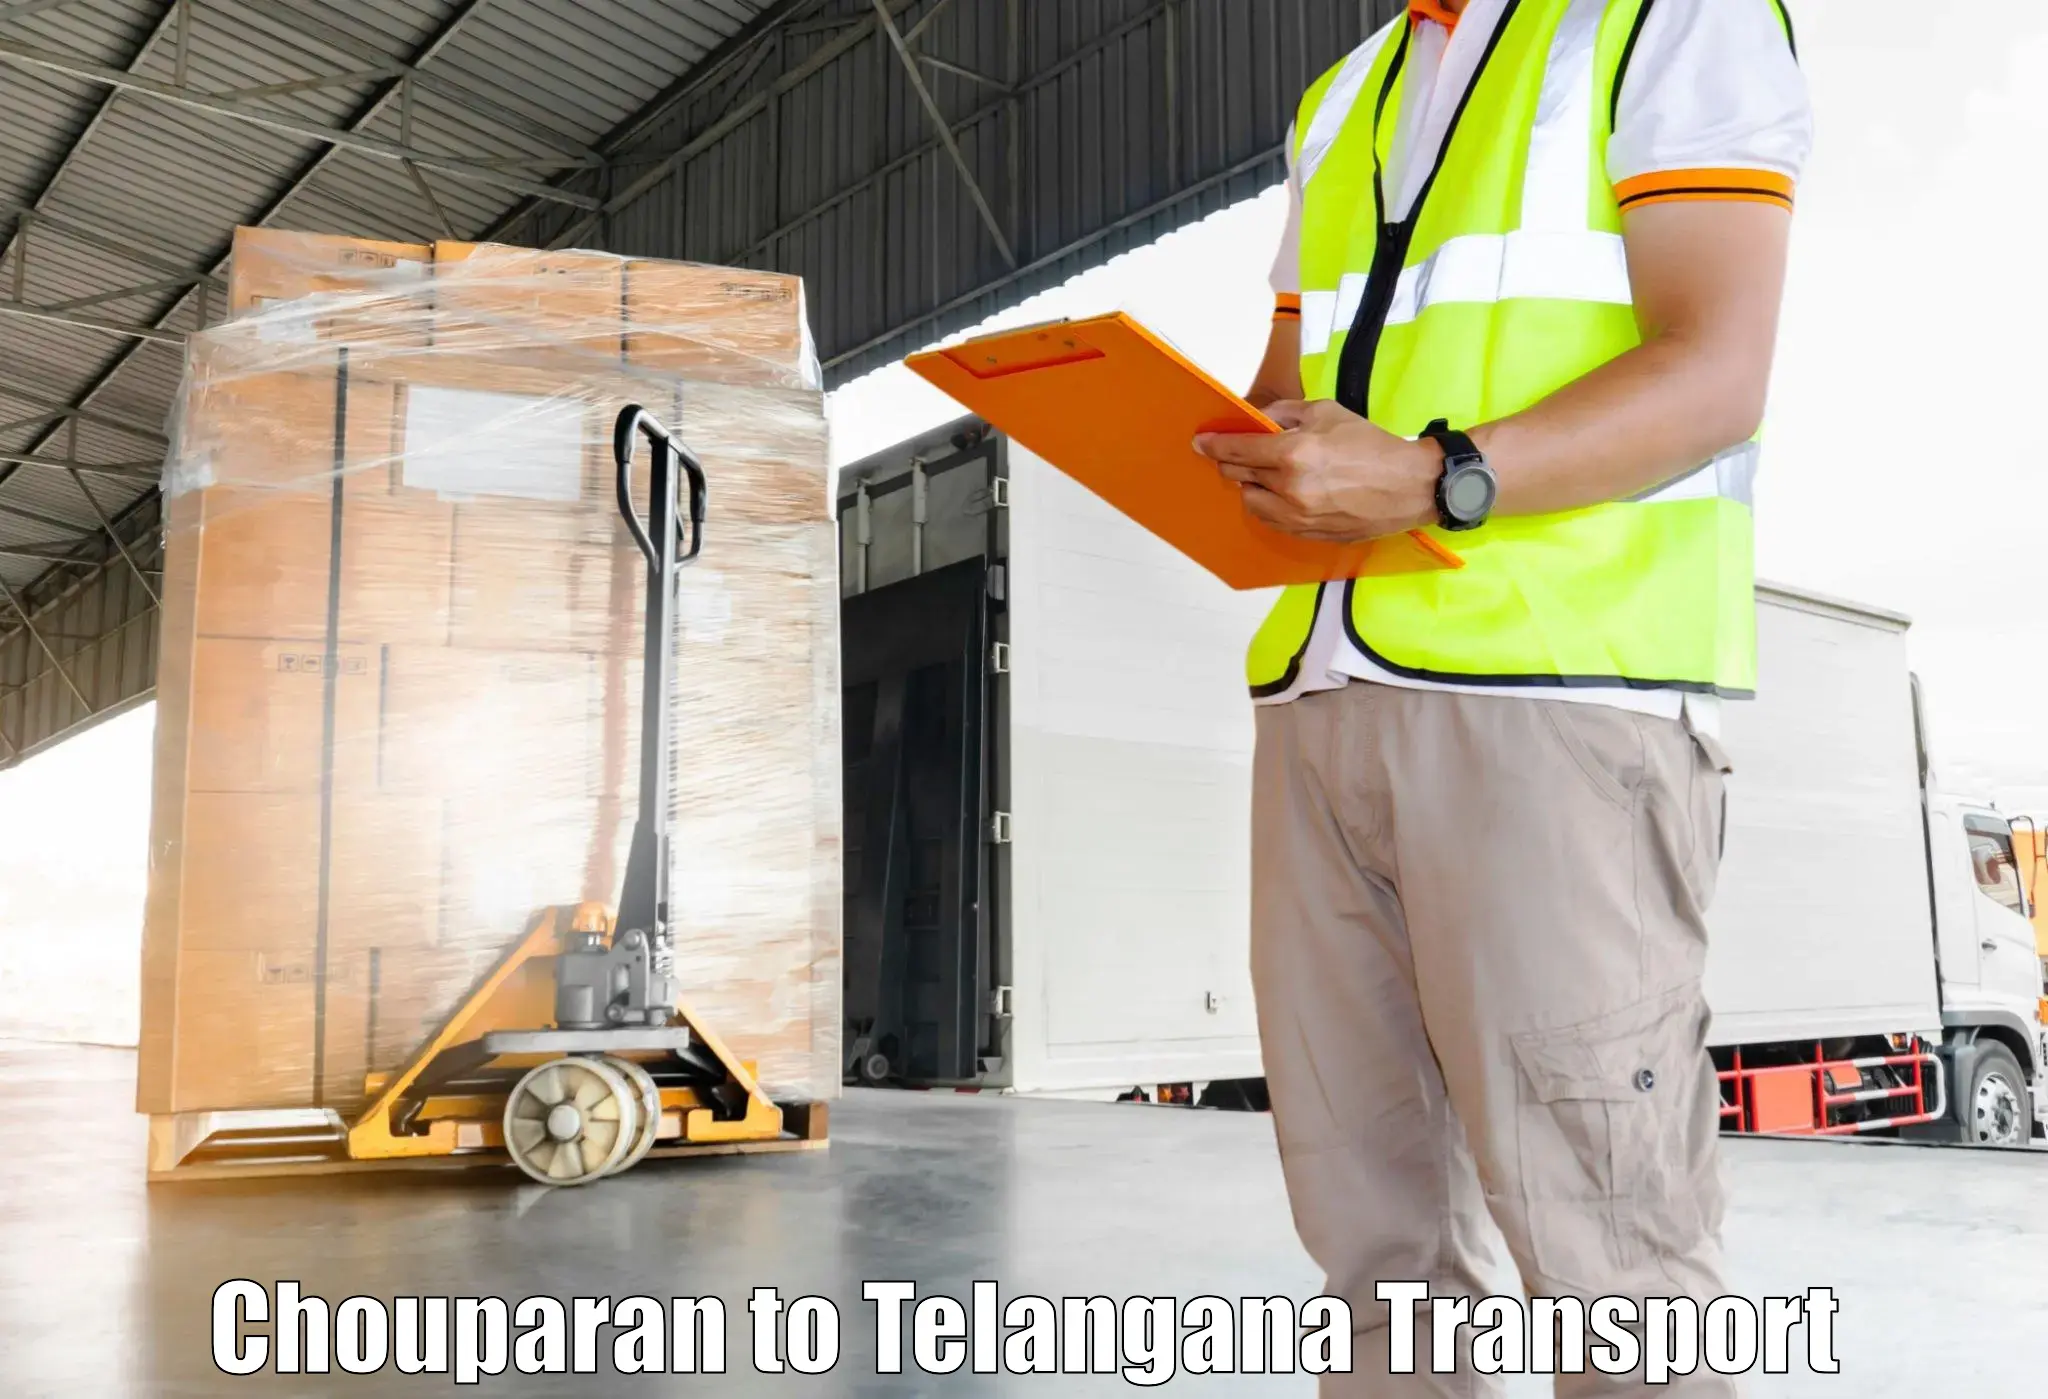 Truck transport companies in India Chouparan to Manthani